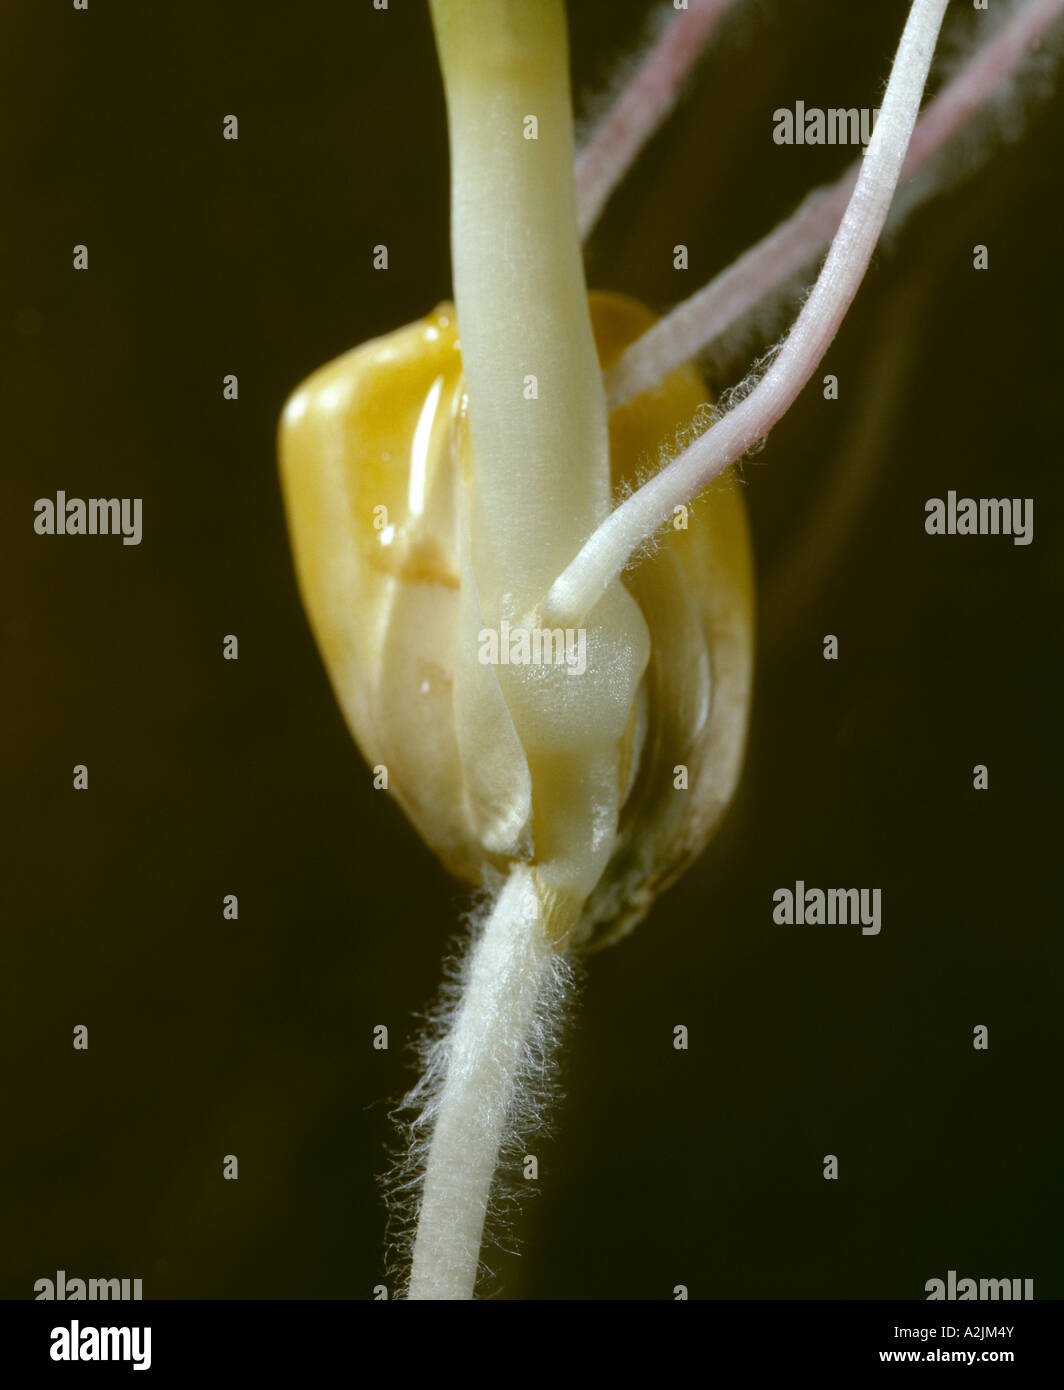 FIELD CORN/GERMINATION GERMINATING KERNEL WITH PRIMARY AND SECONDARY ROOTS, ROOT HAIRS AND COLEOPTILE Stock Photo